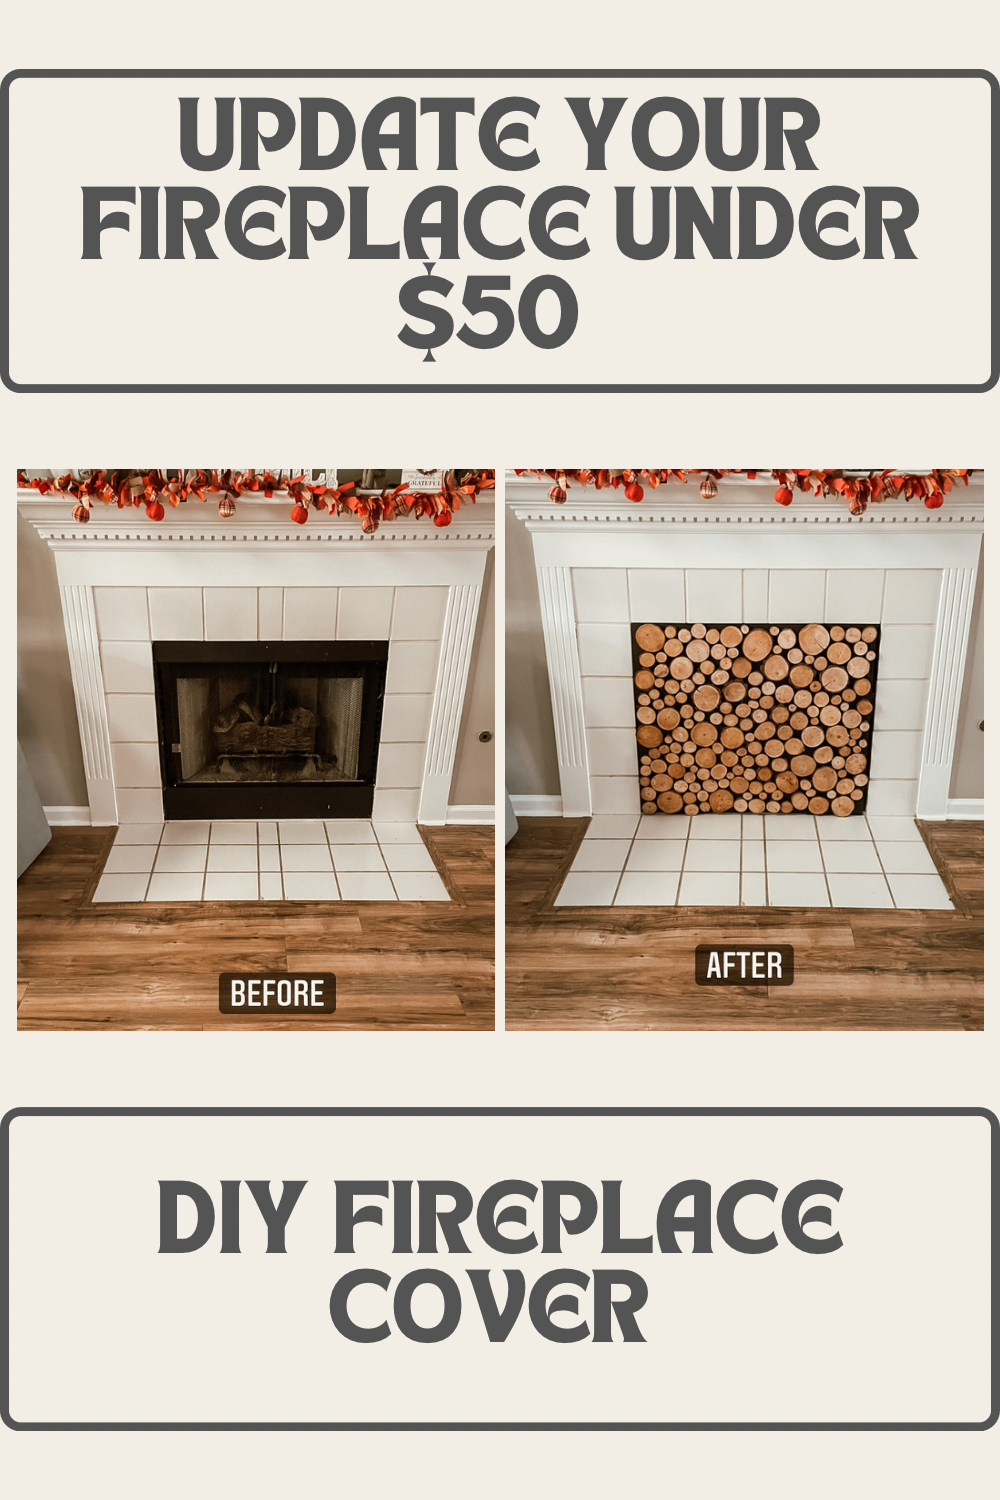 Update You Fireplace Under $50 – DIY Fireplace Cover